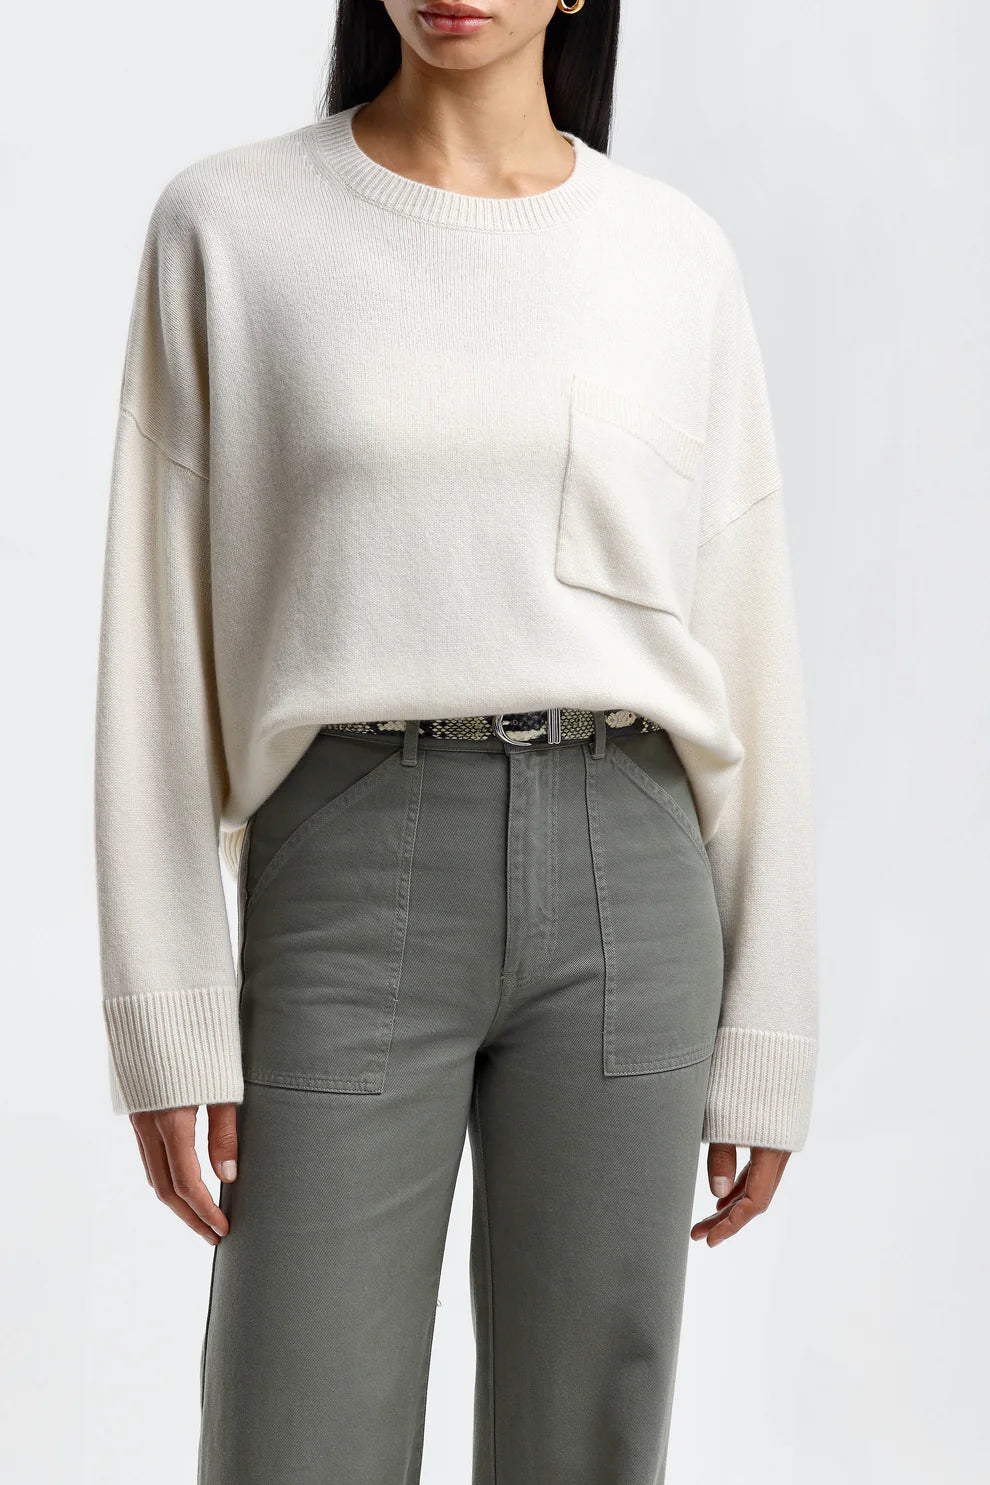 Lisa Yang Andie Cashmere Sweater